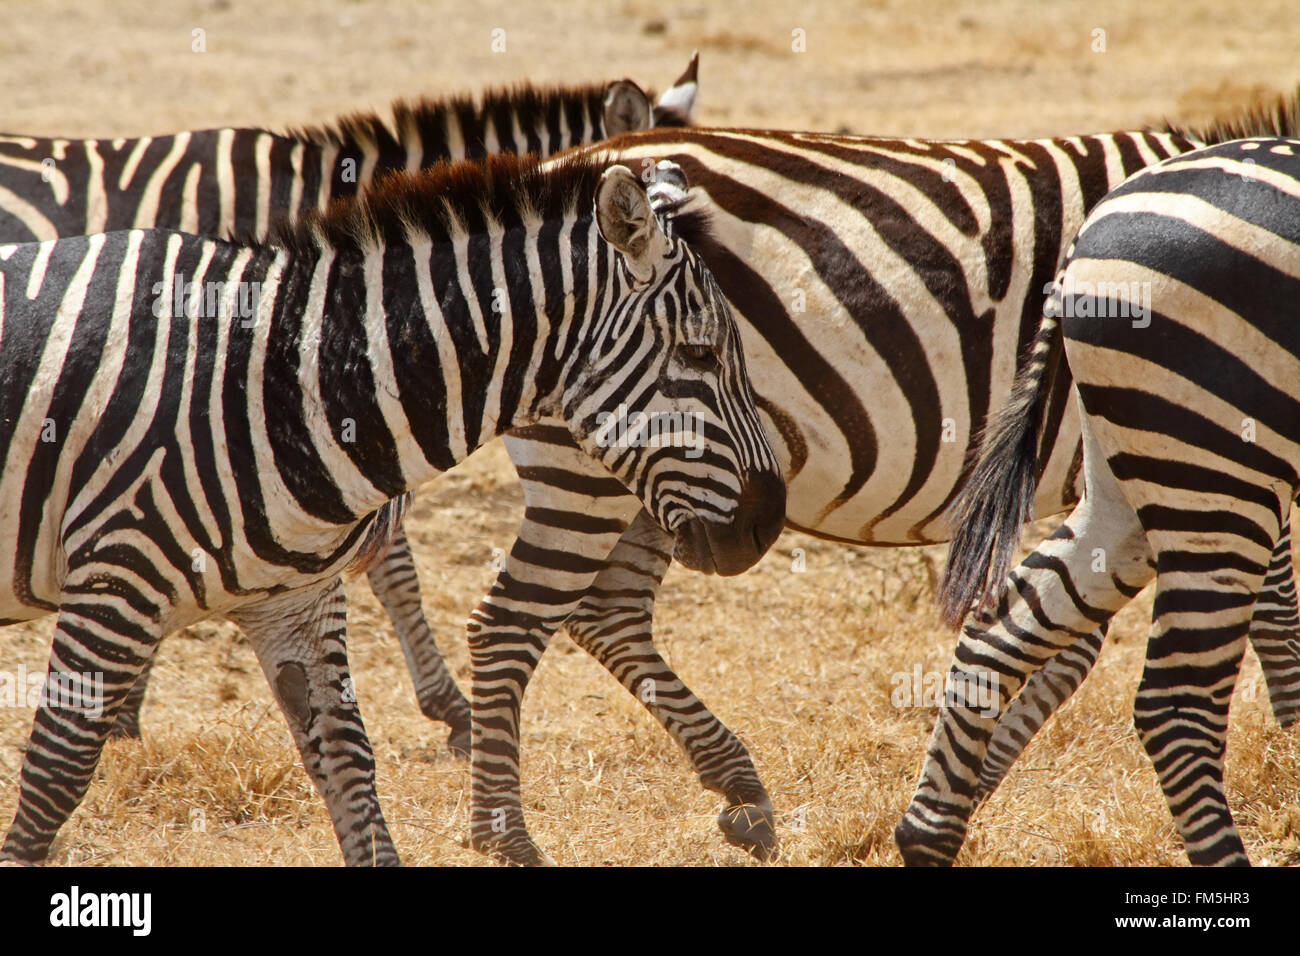 A beat up and scarred old zebra walks with the rest of the herd Stock Photo